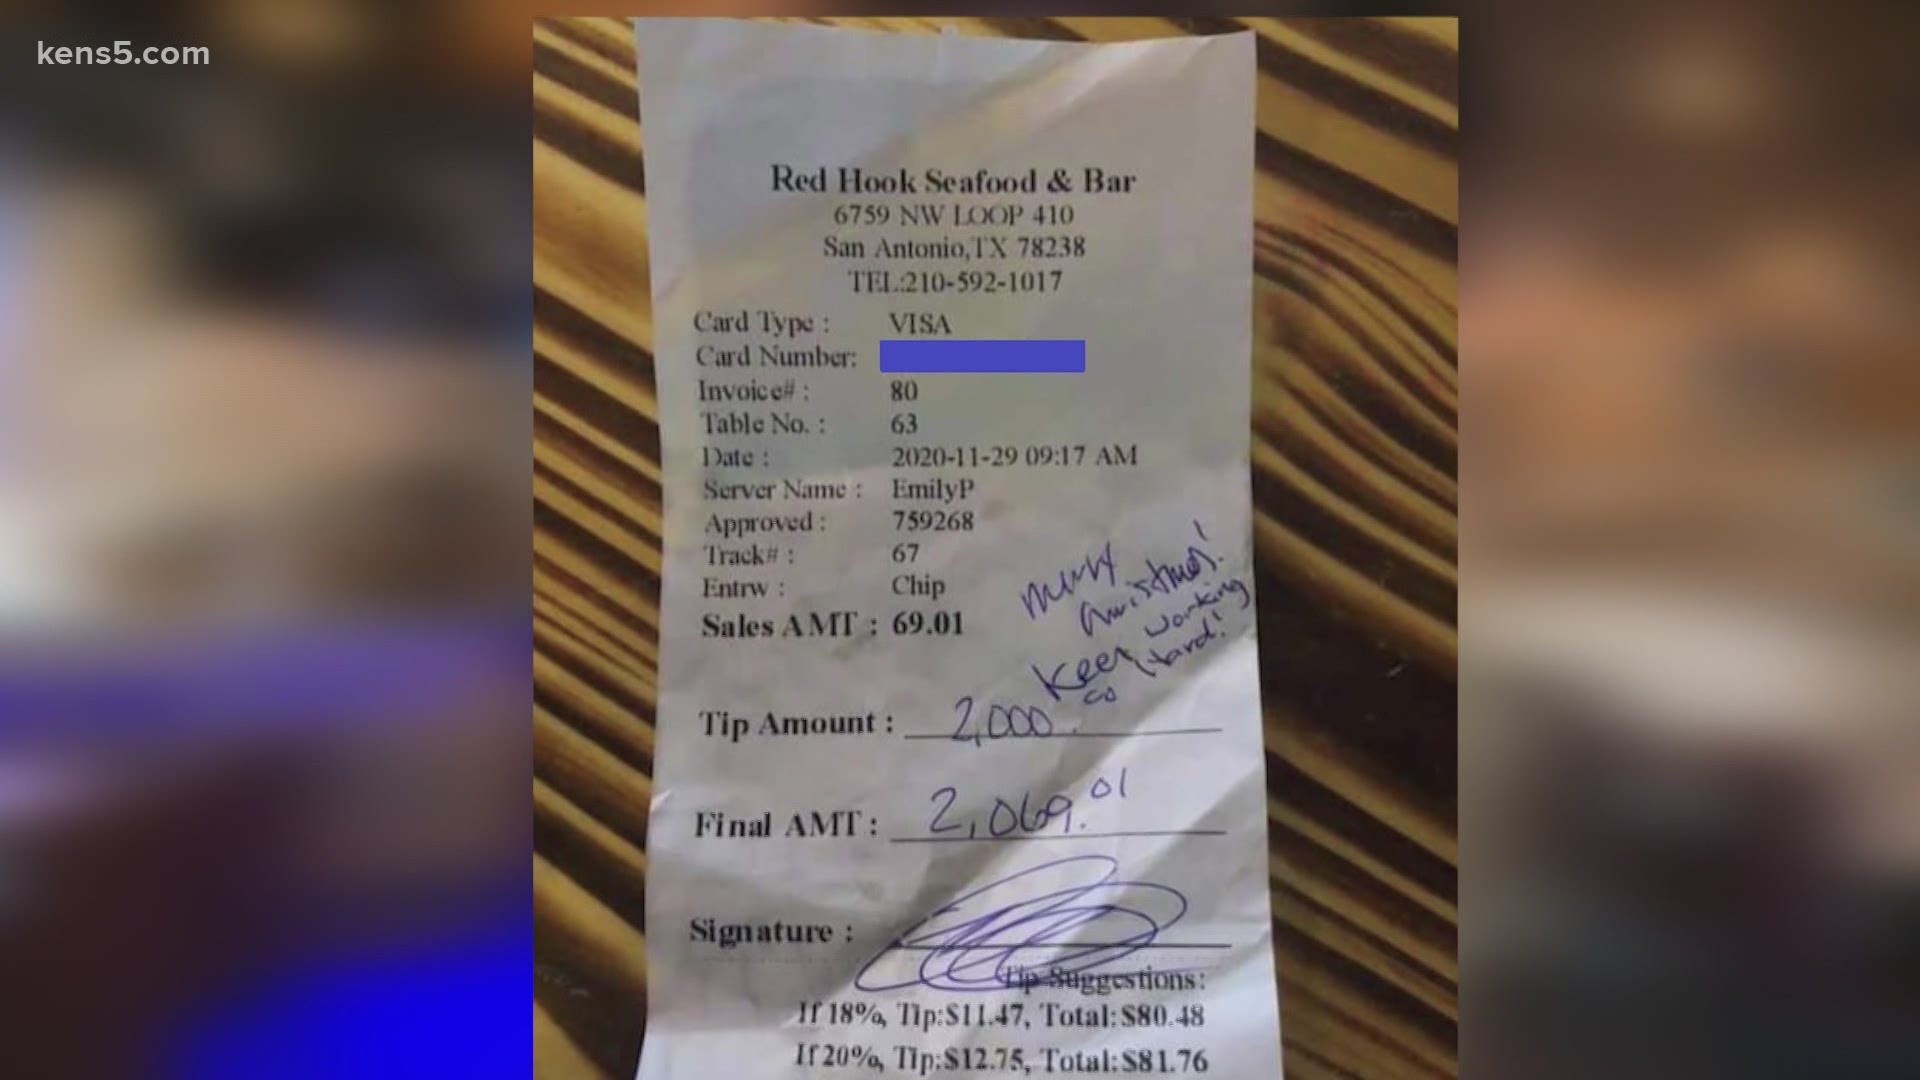 Management at the restaurant that initially prevented the server from getting her tip says it was all a misunderstanding with the credit card company.